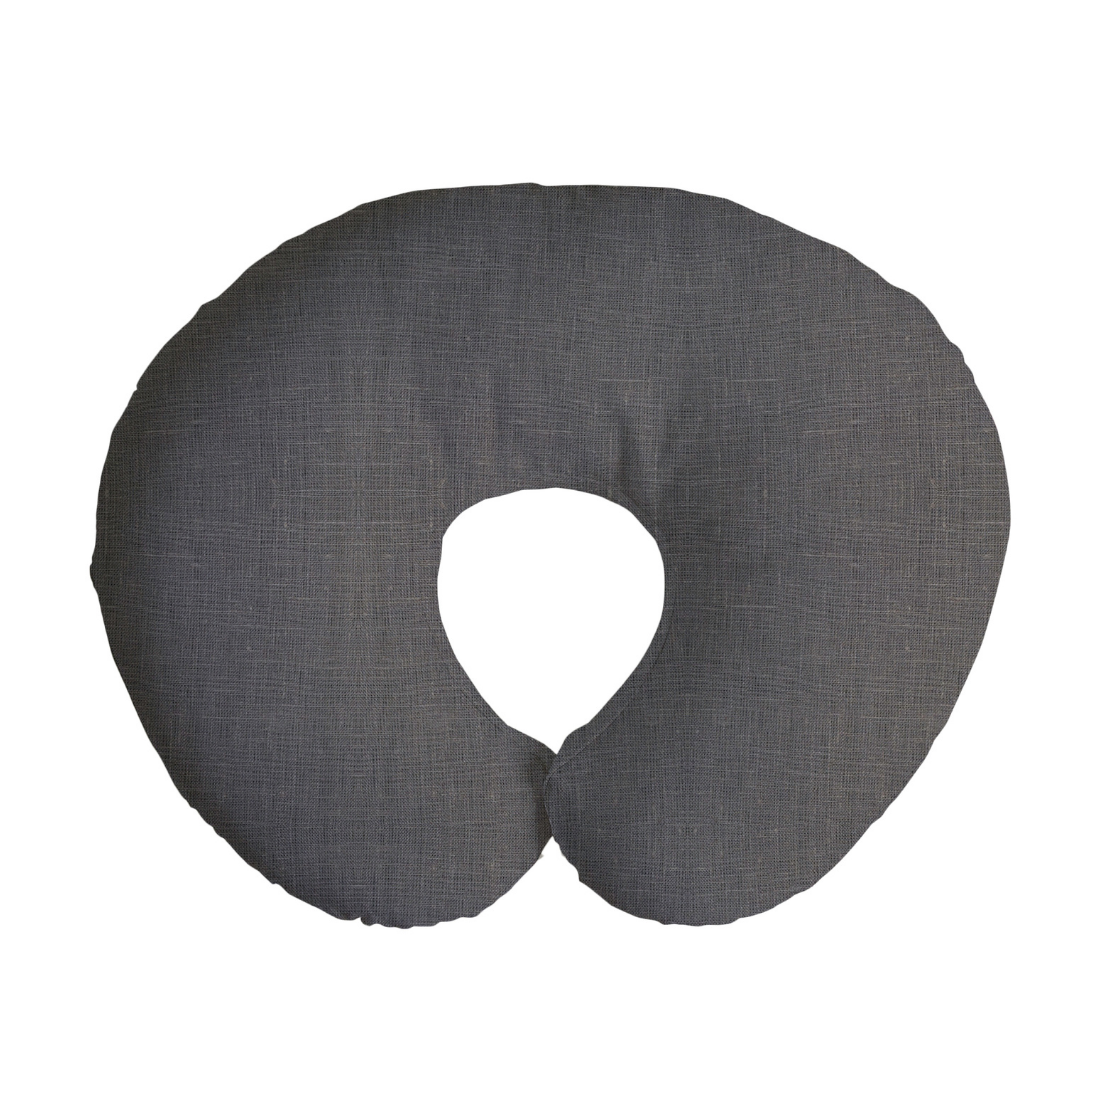 Nursing Pillow Cover | "Perfect for my neutral nursery!"